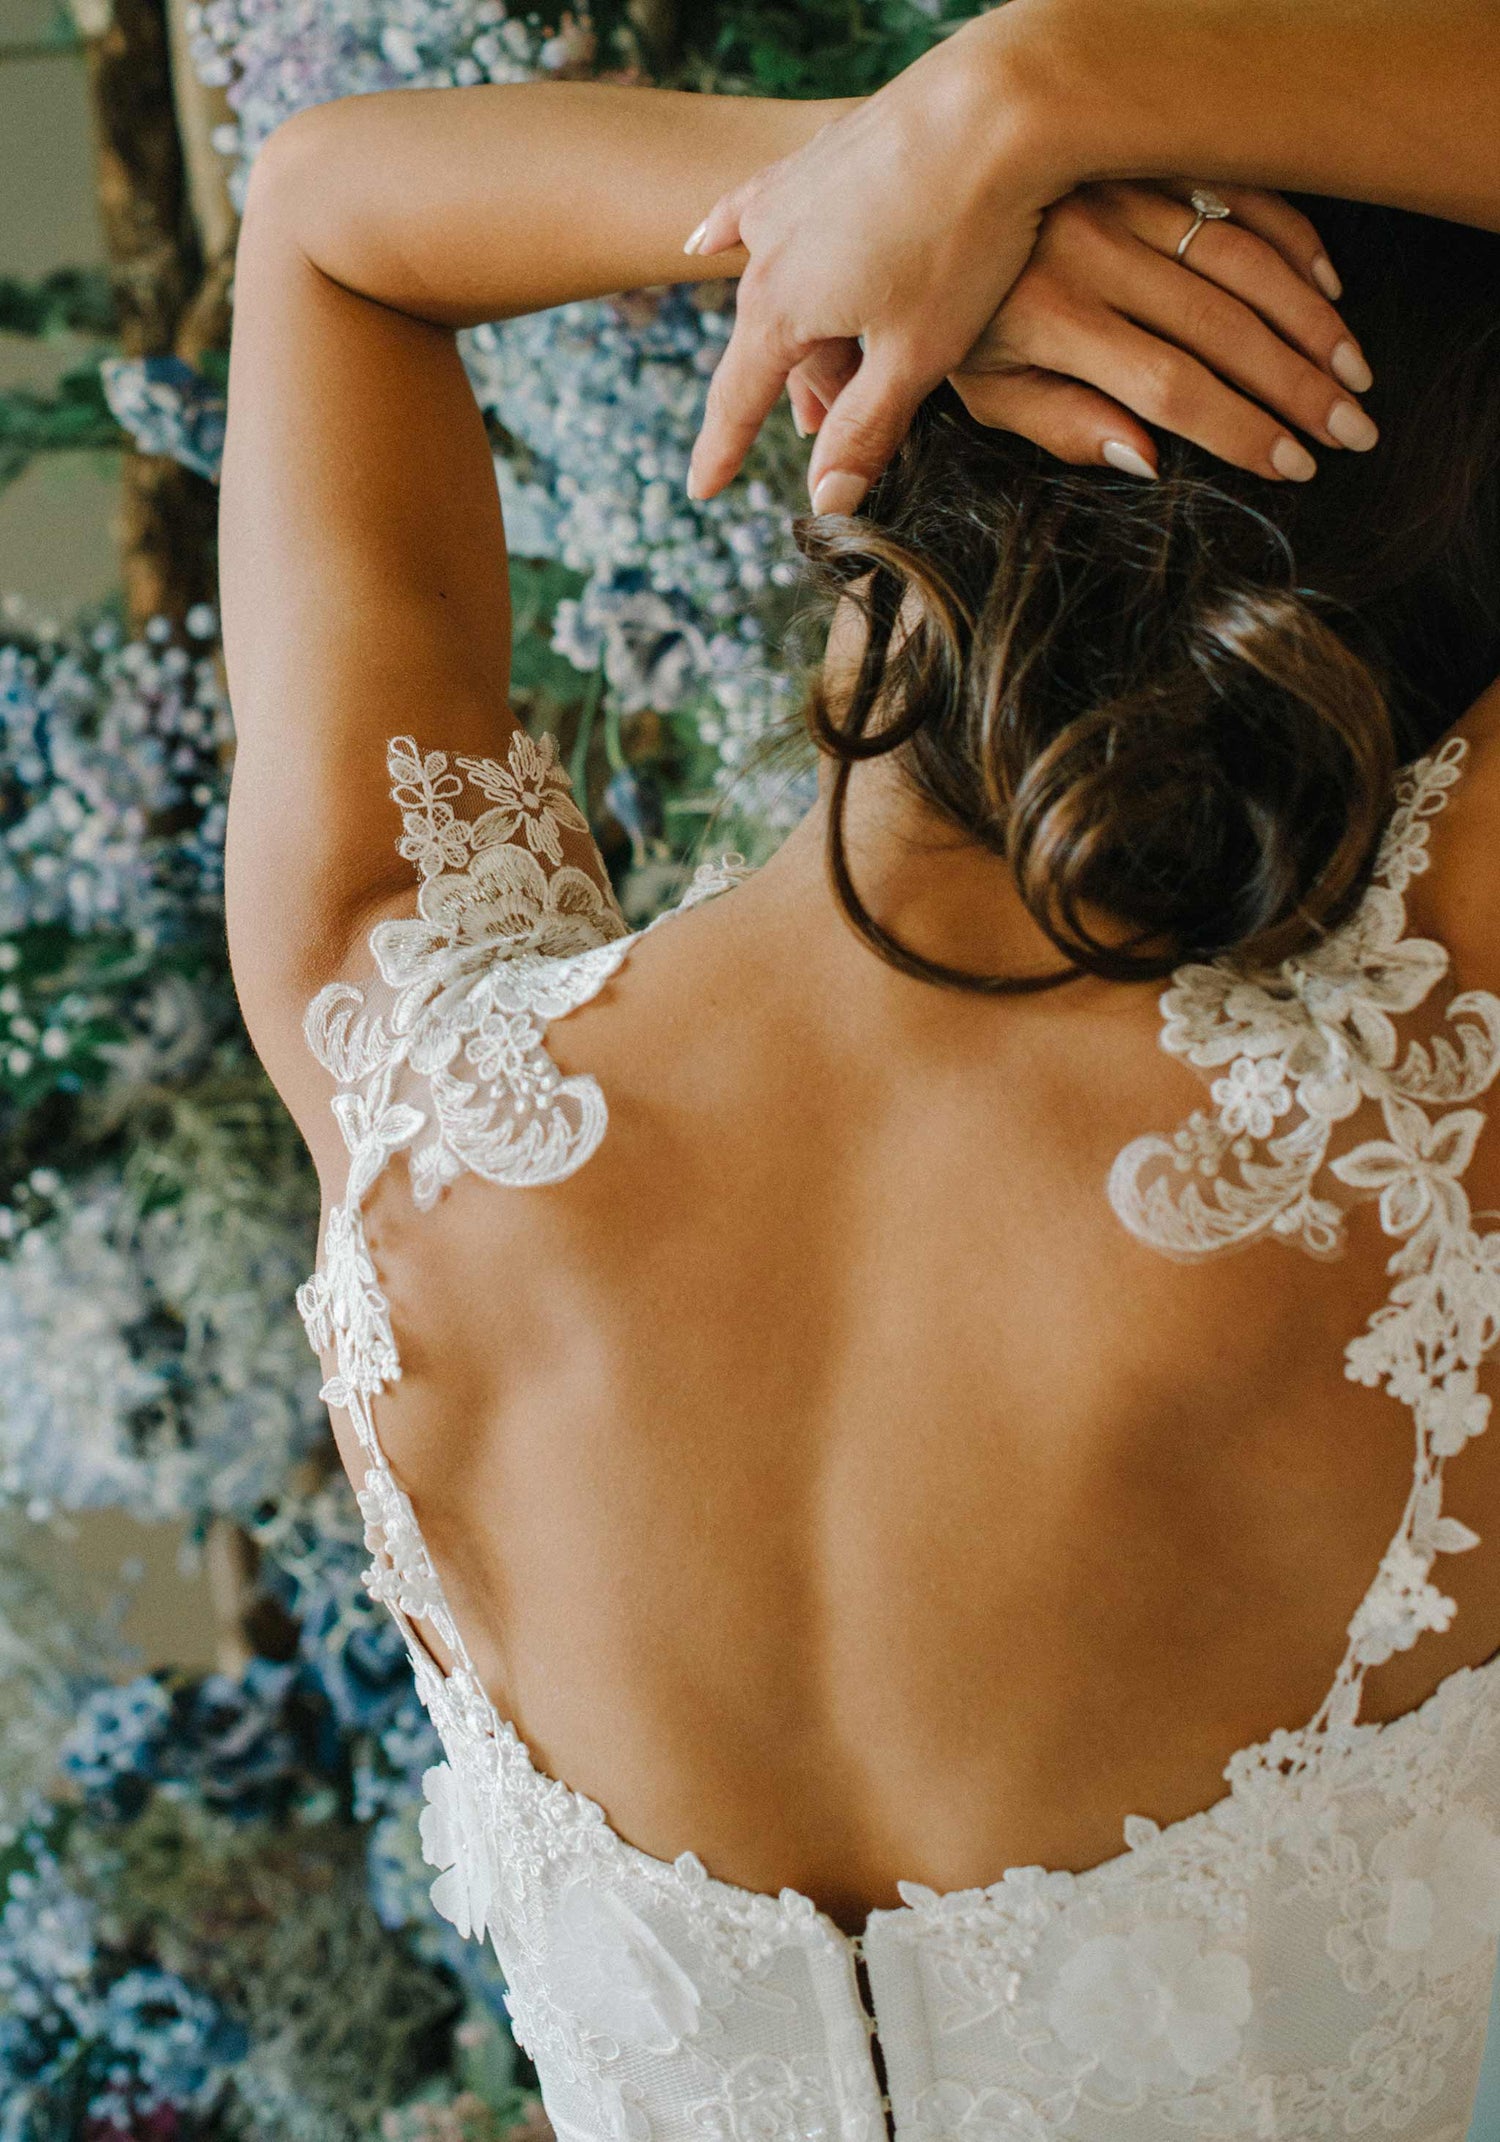 Bridal Corset And Bustier: 12 Great Ideas  Bridal nightwear, Bridal bustier,  Bridal corset